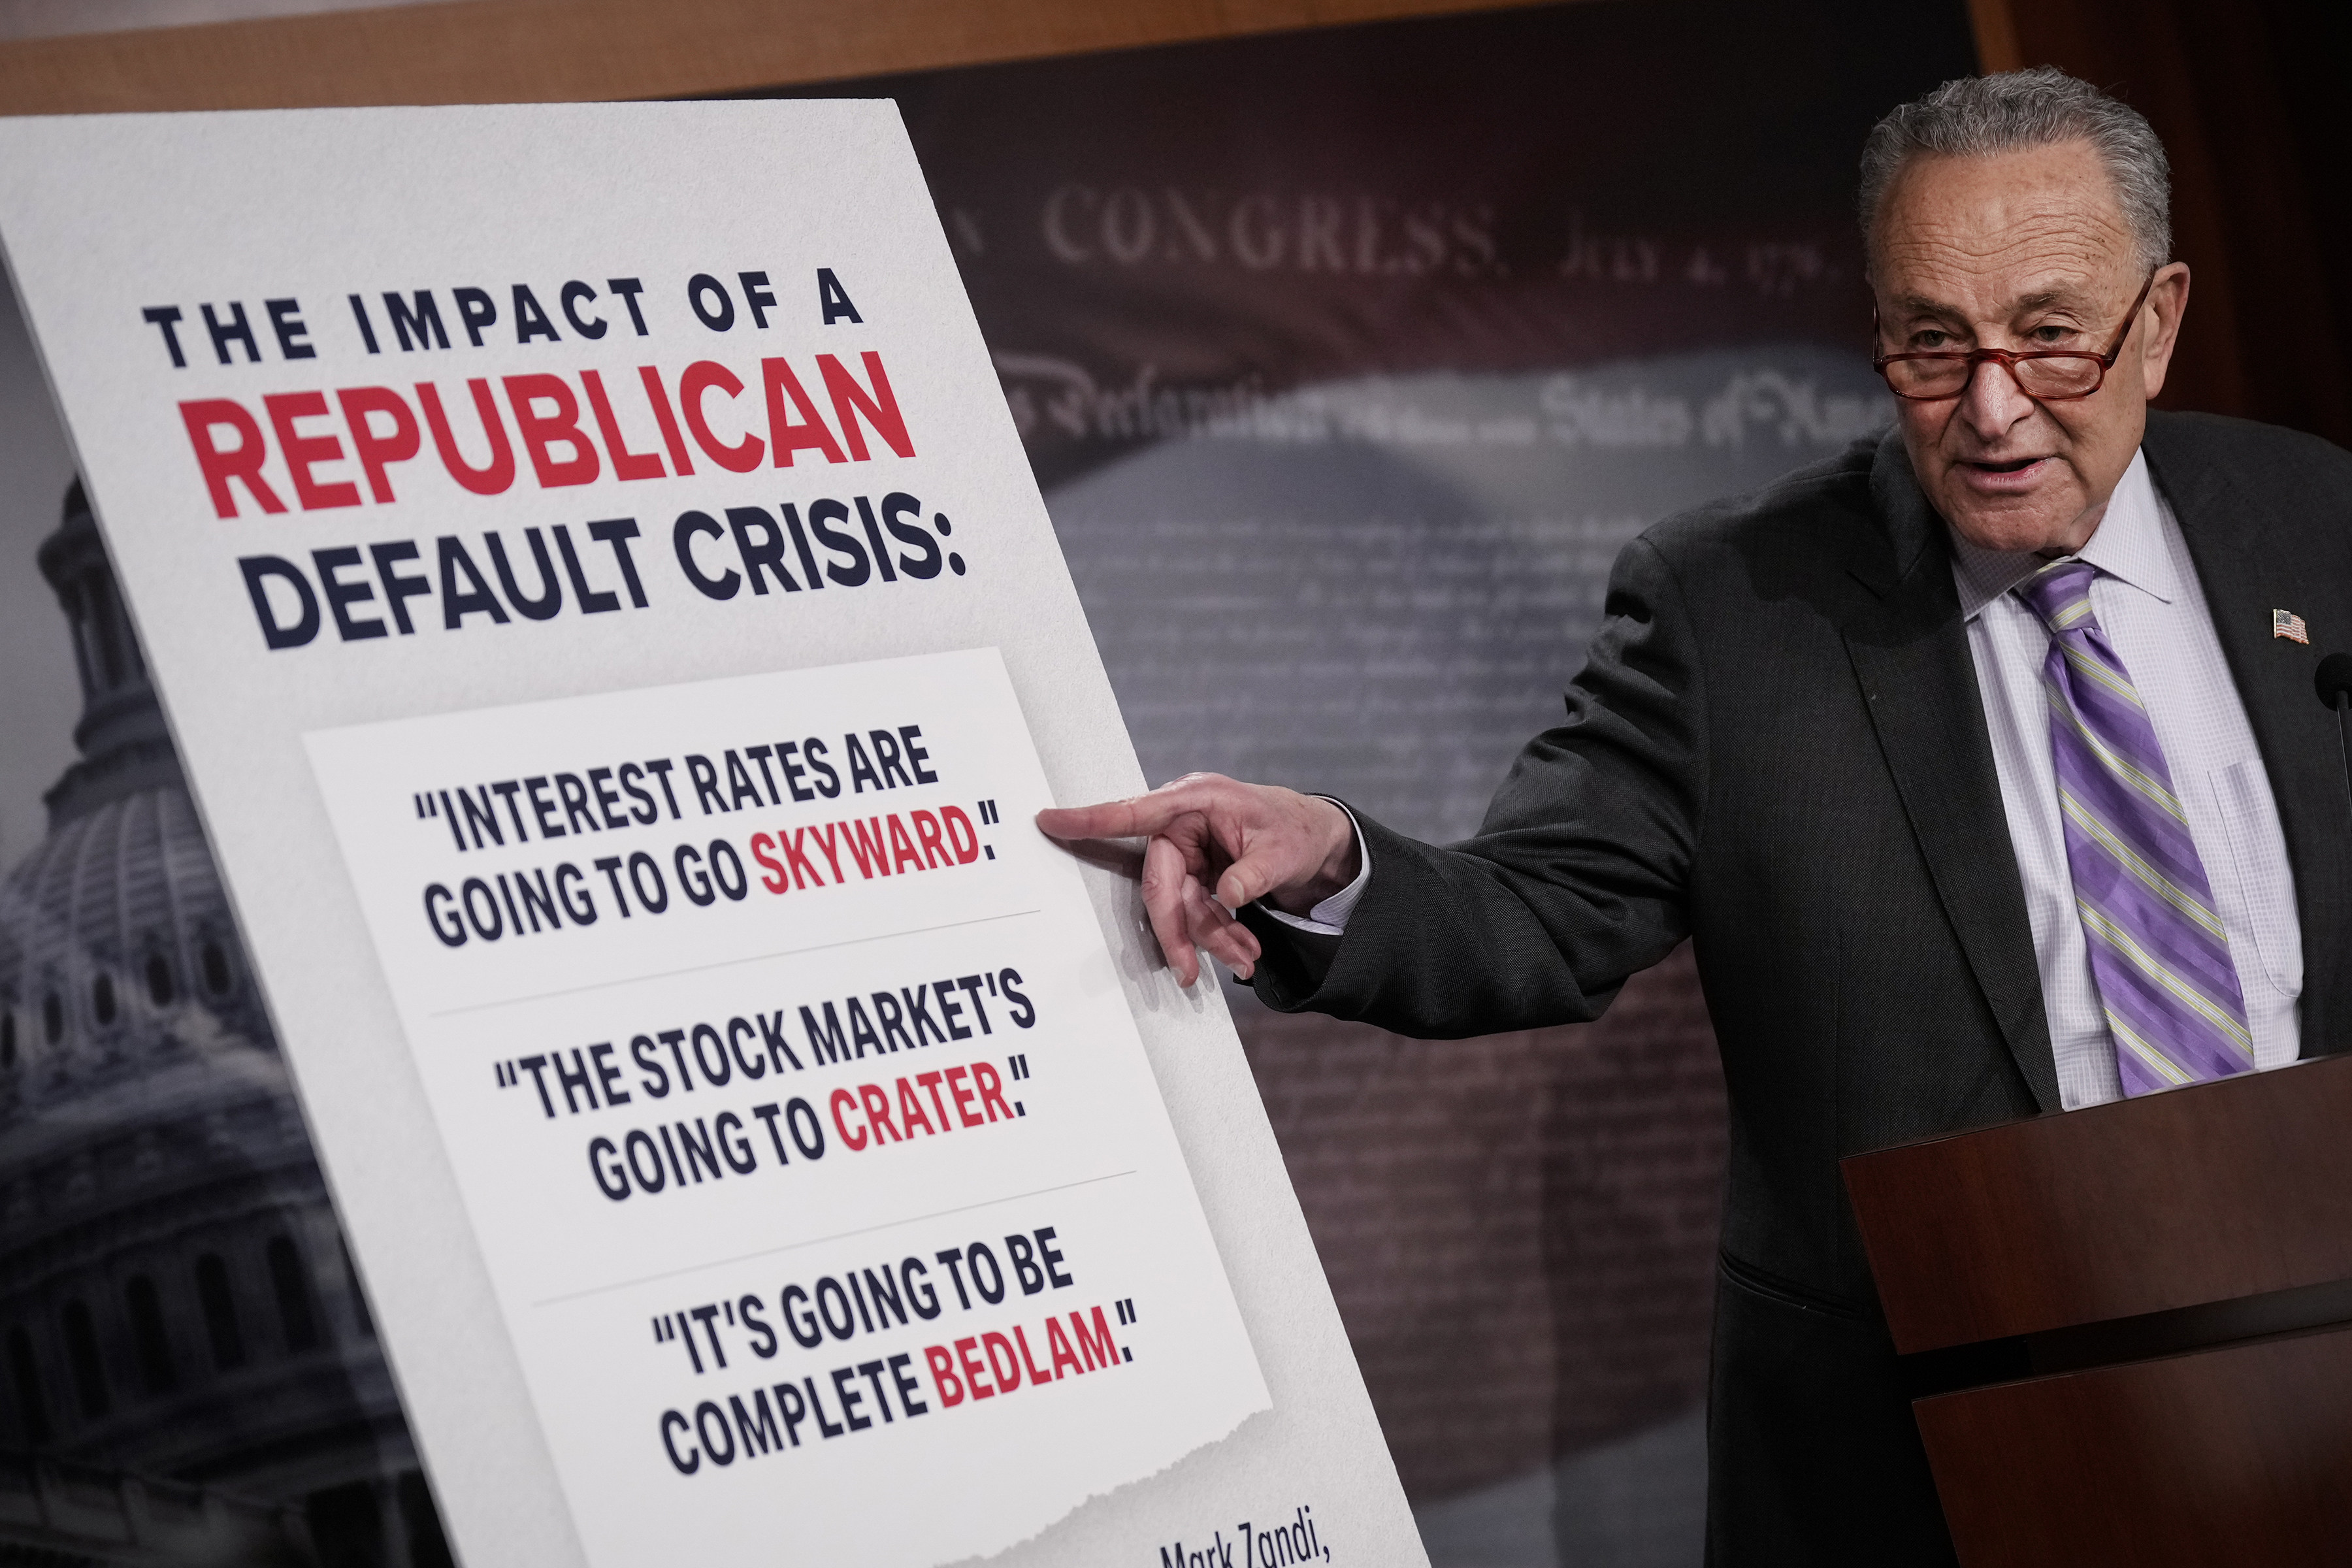 Senate Majority Leader Chuck Schumer speaks during a news conference at the US Capitol in Washington on February 2. Schumer criticised House Republicans for what he called brinkmanship and irresponsibility over the debt ceiling. Photo: Getty Images